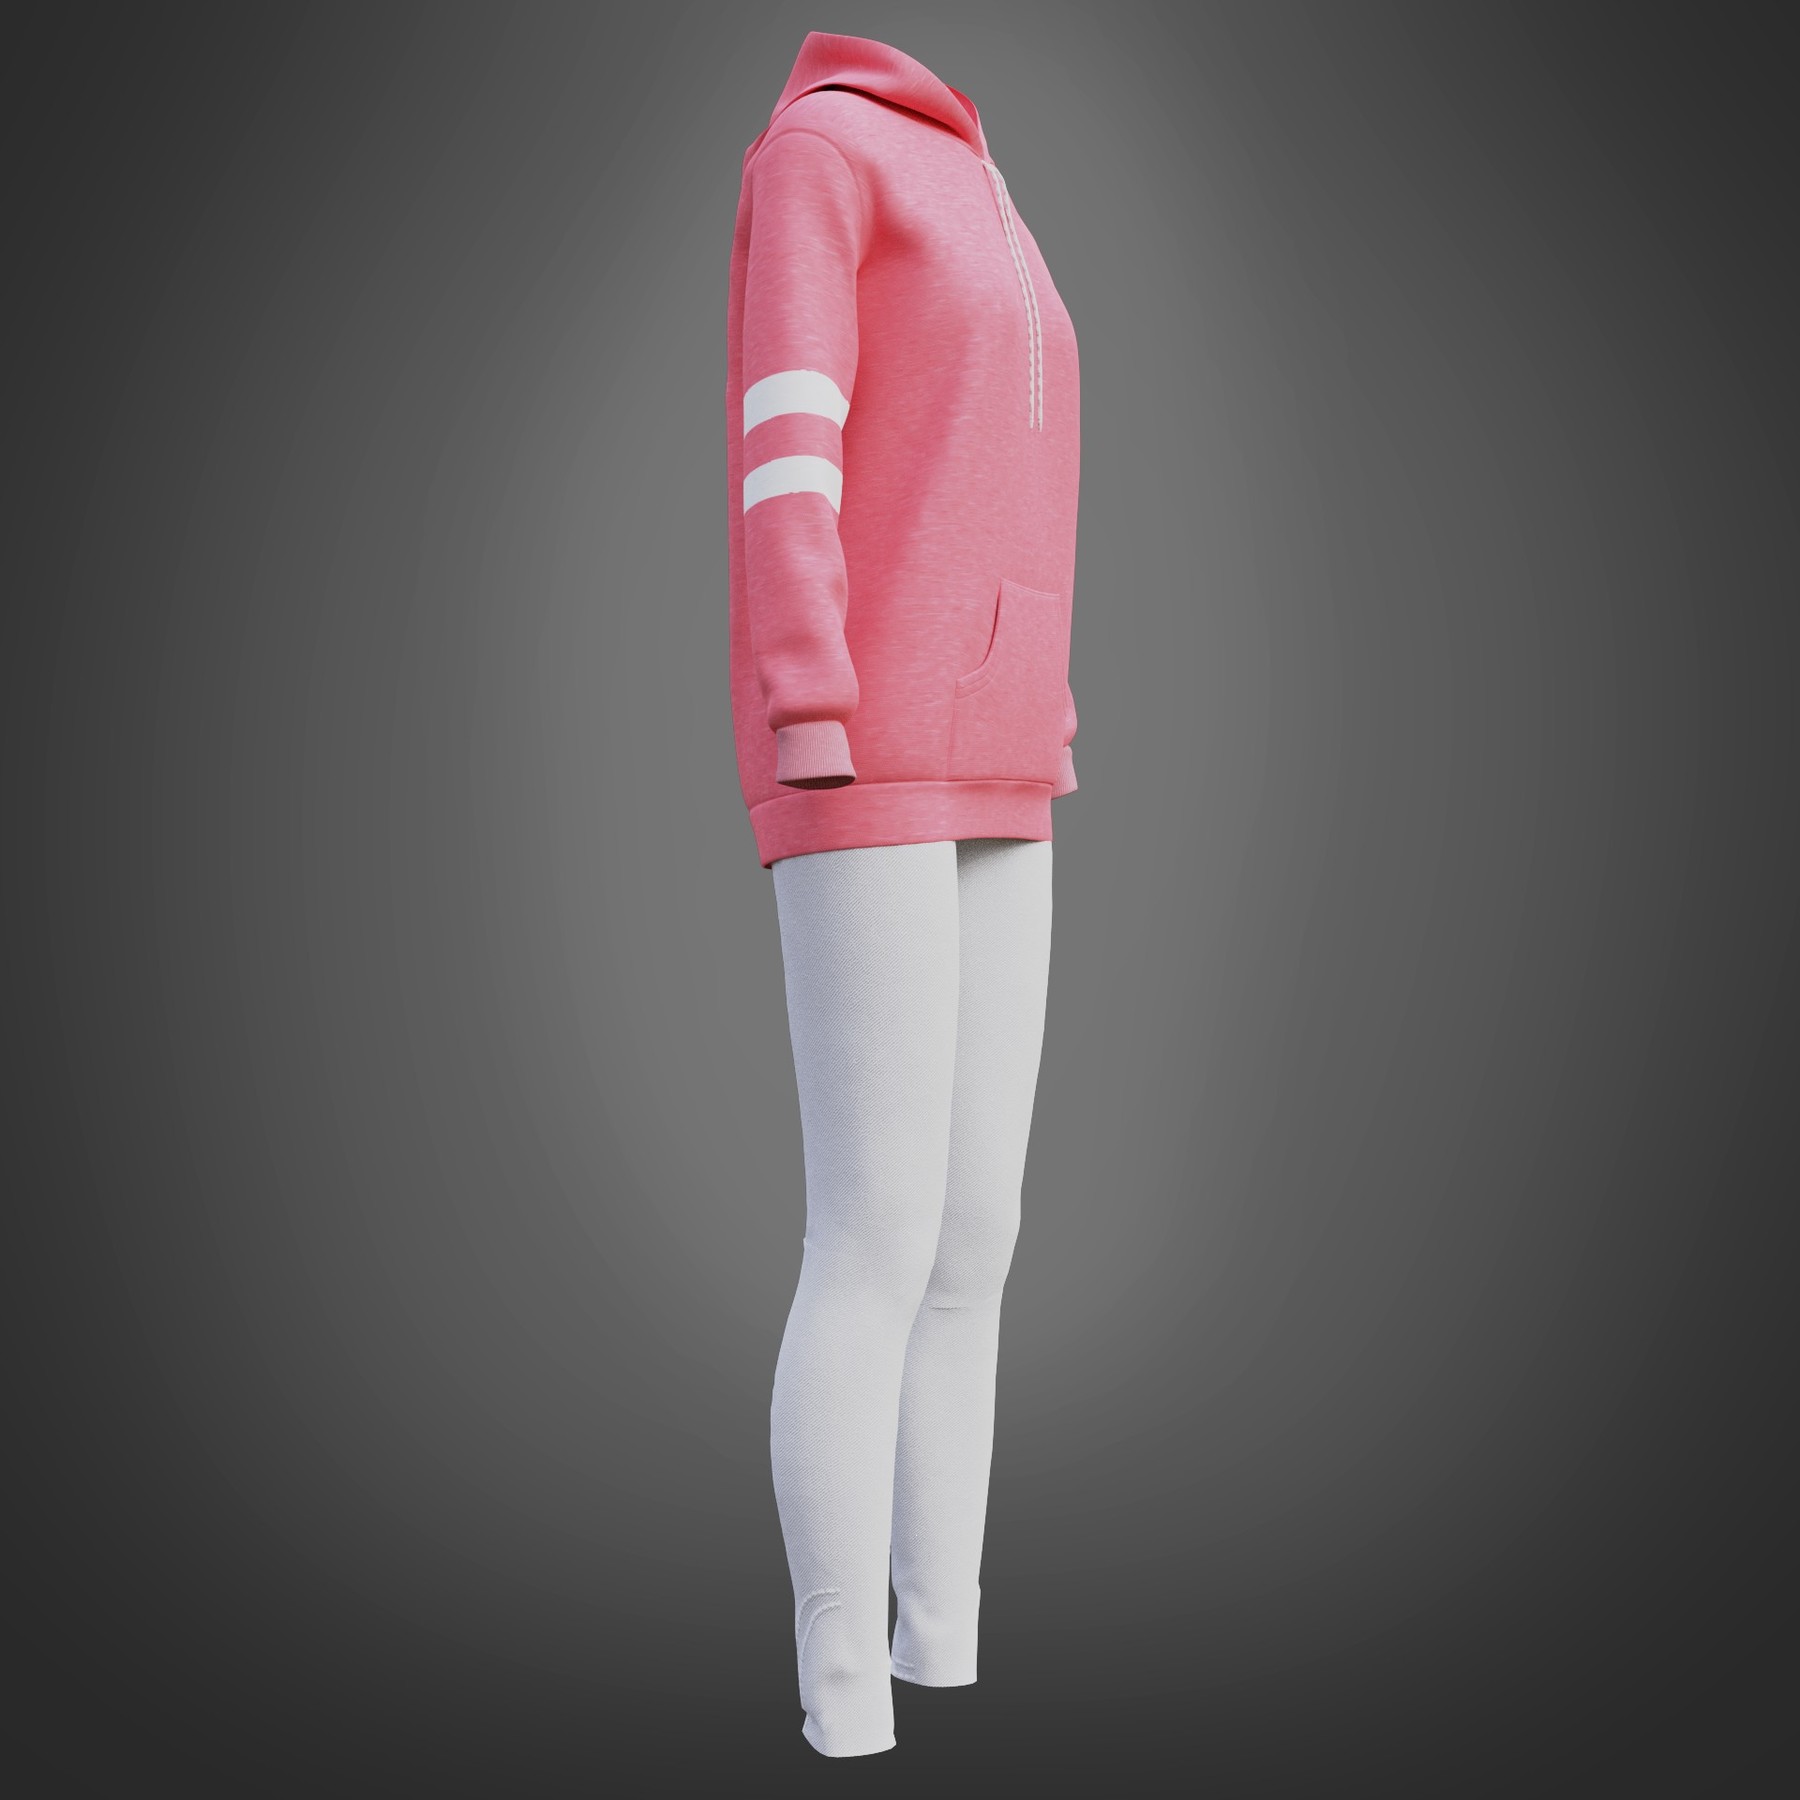 leggings hoodie - oversized Game Cute pink | outfit - Assets 3D Model and ArtStation